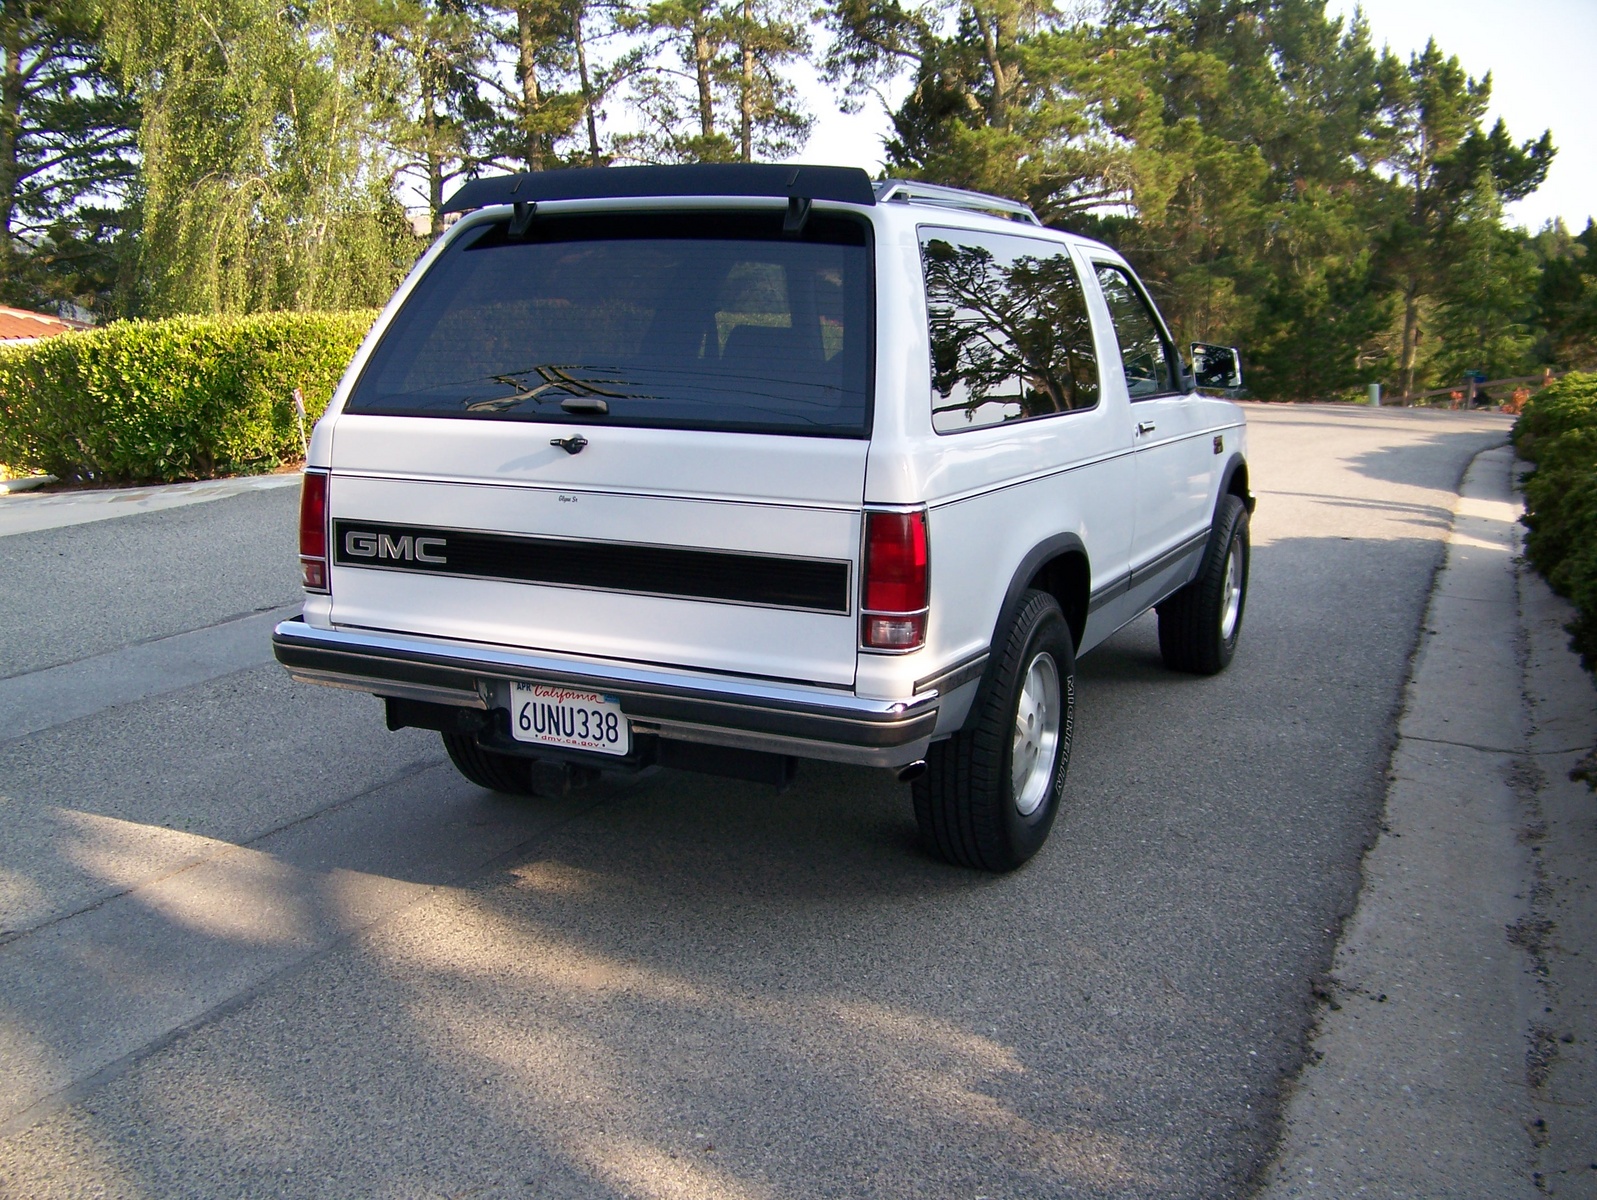 1996 Gmc jimmy specifications #1